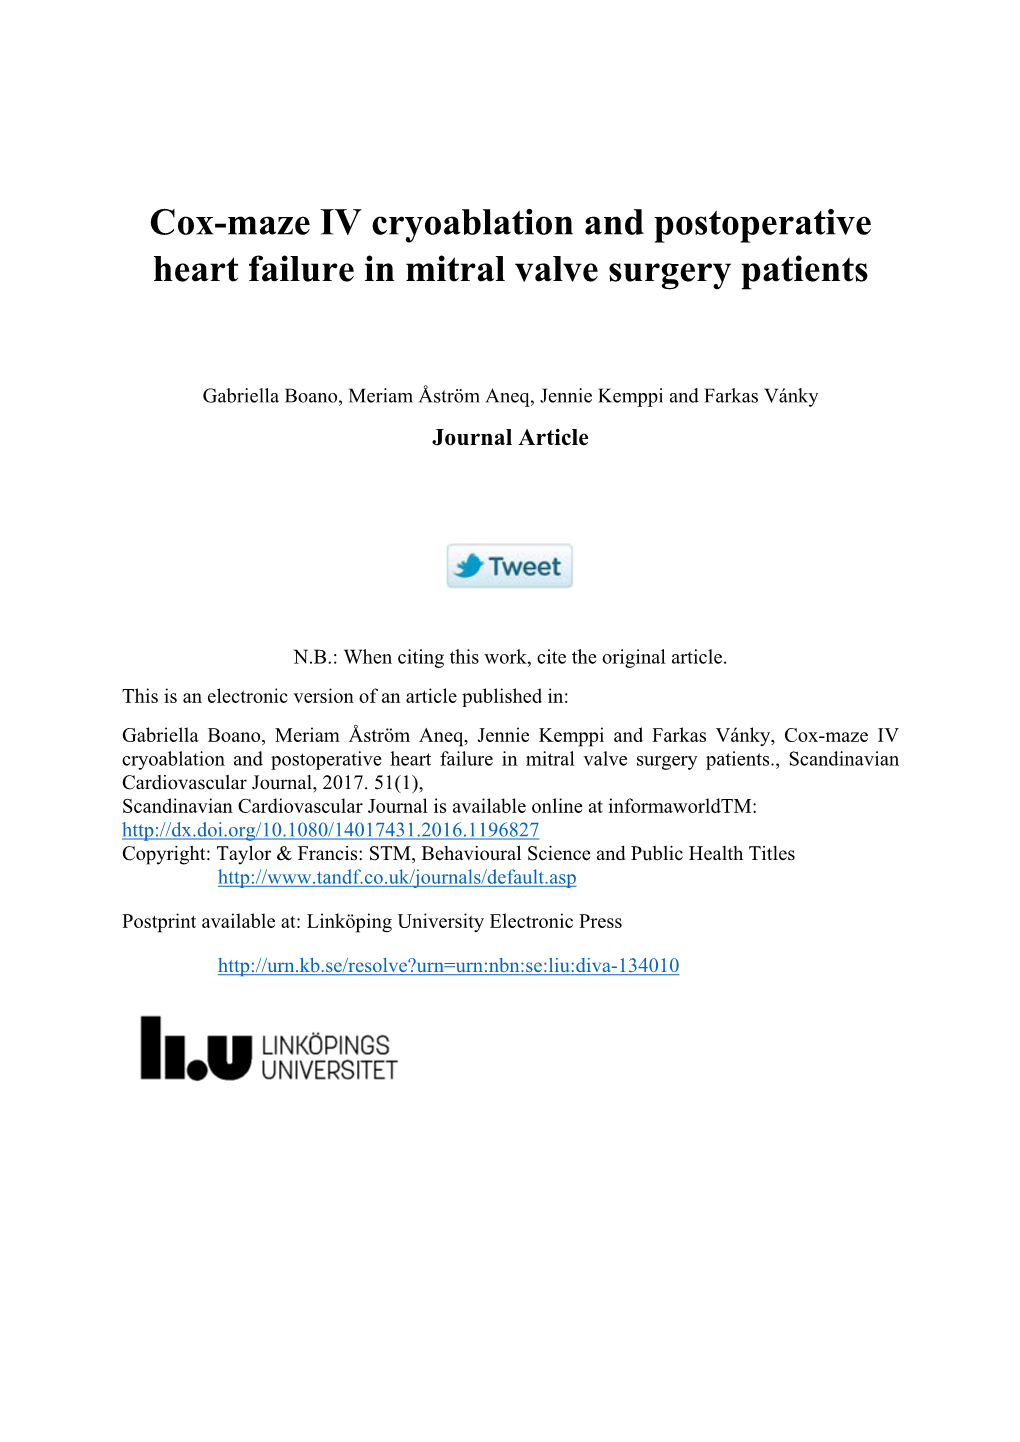 Cox-Maze IV Cryoablation and Postoperative Heart Failure in Mitral Valve Surgery Patients